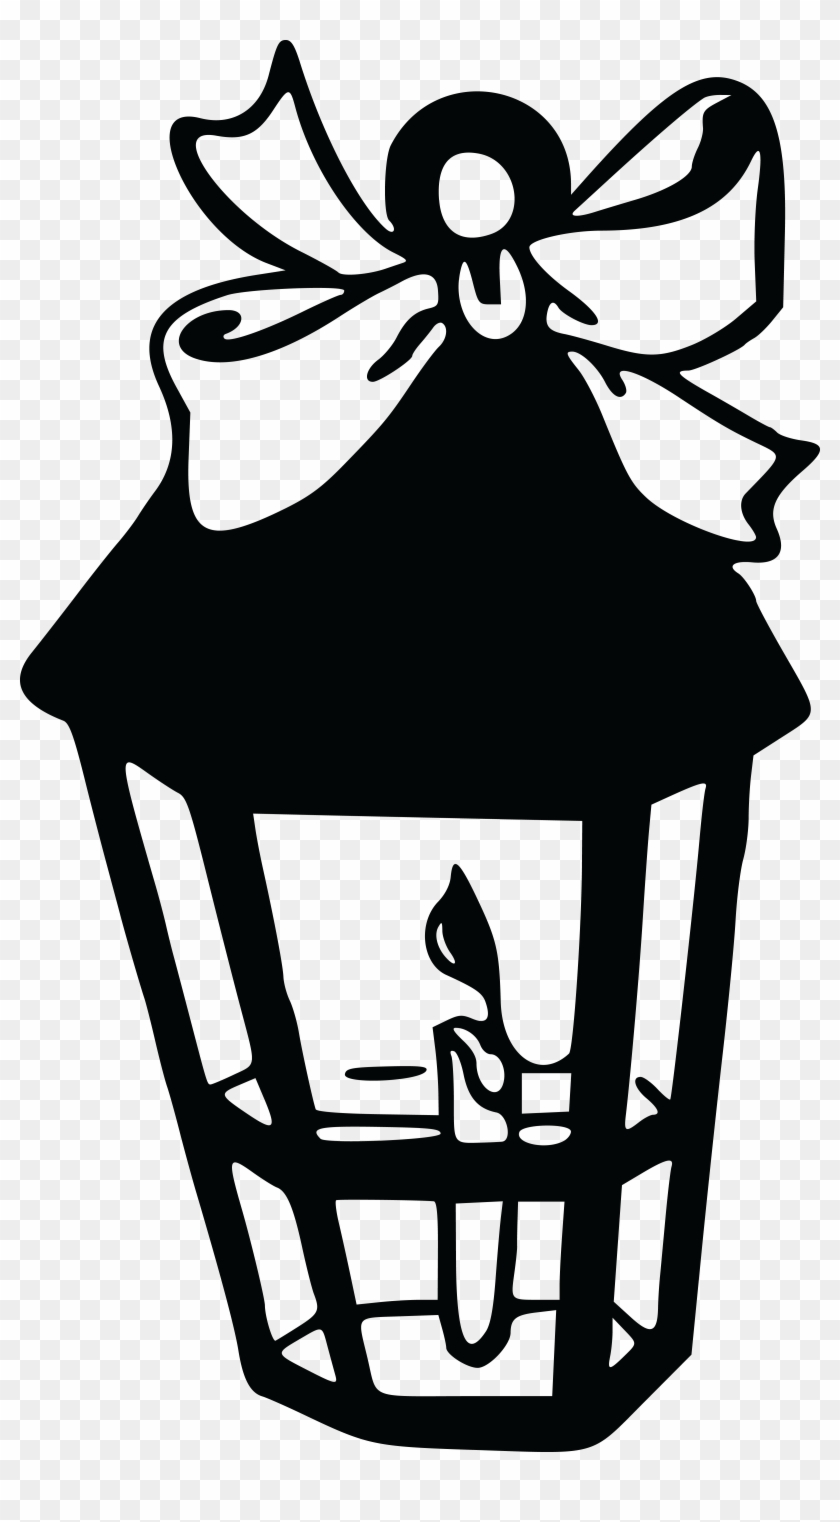 Free Clipart Of A Candle Lantern - Candle Lantern Clipart #76559